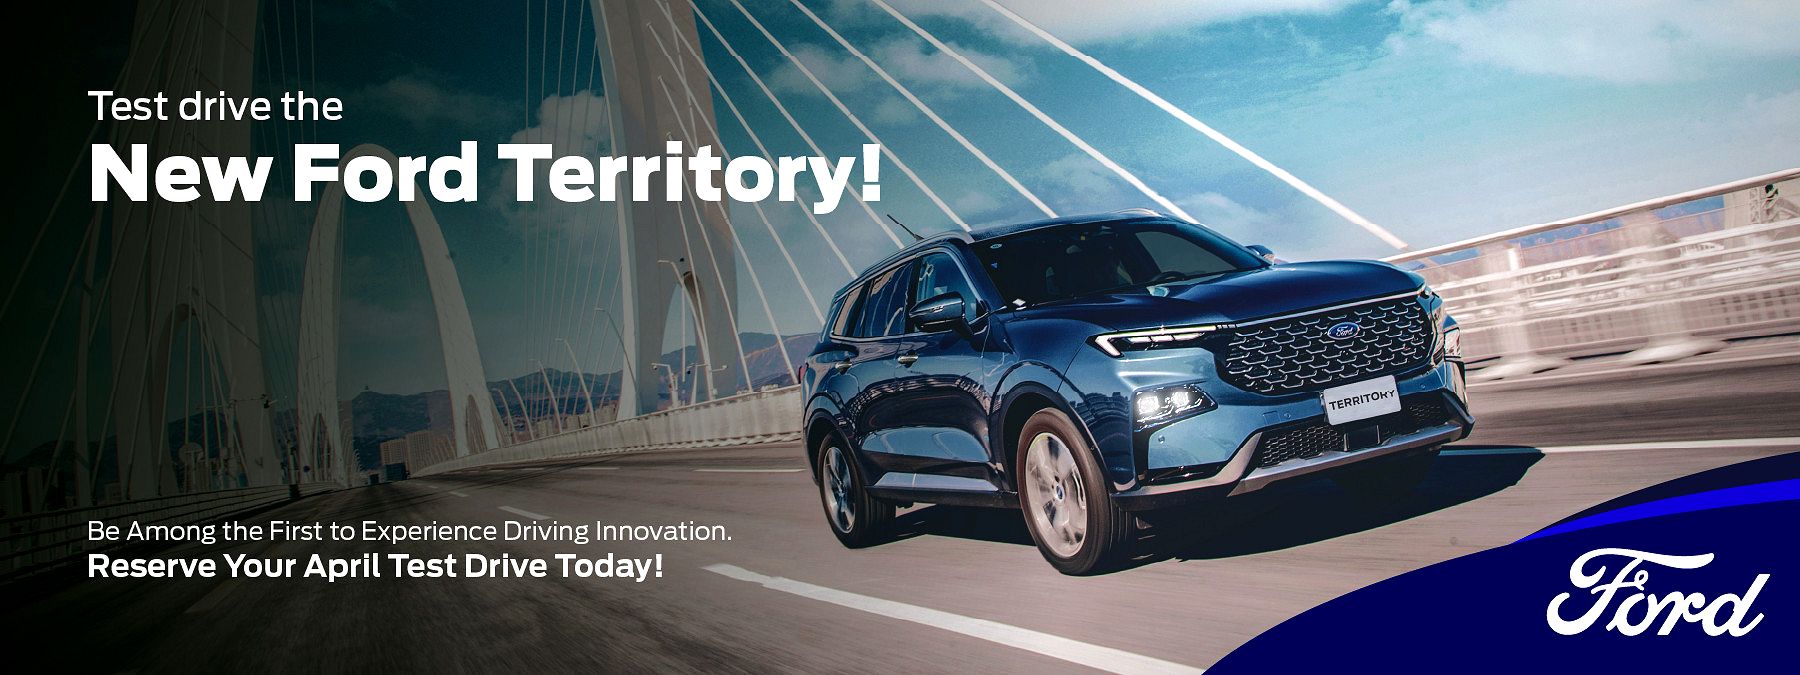 All New Ford Territory! AVAILABLE TO TEST DRIVE IN APRIL